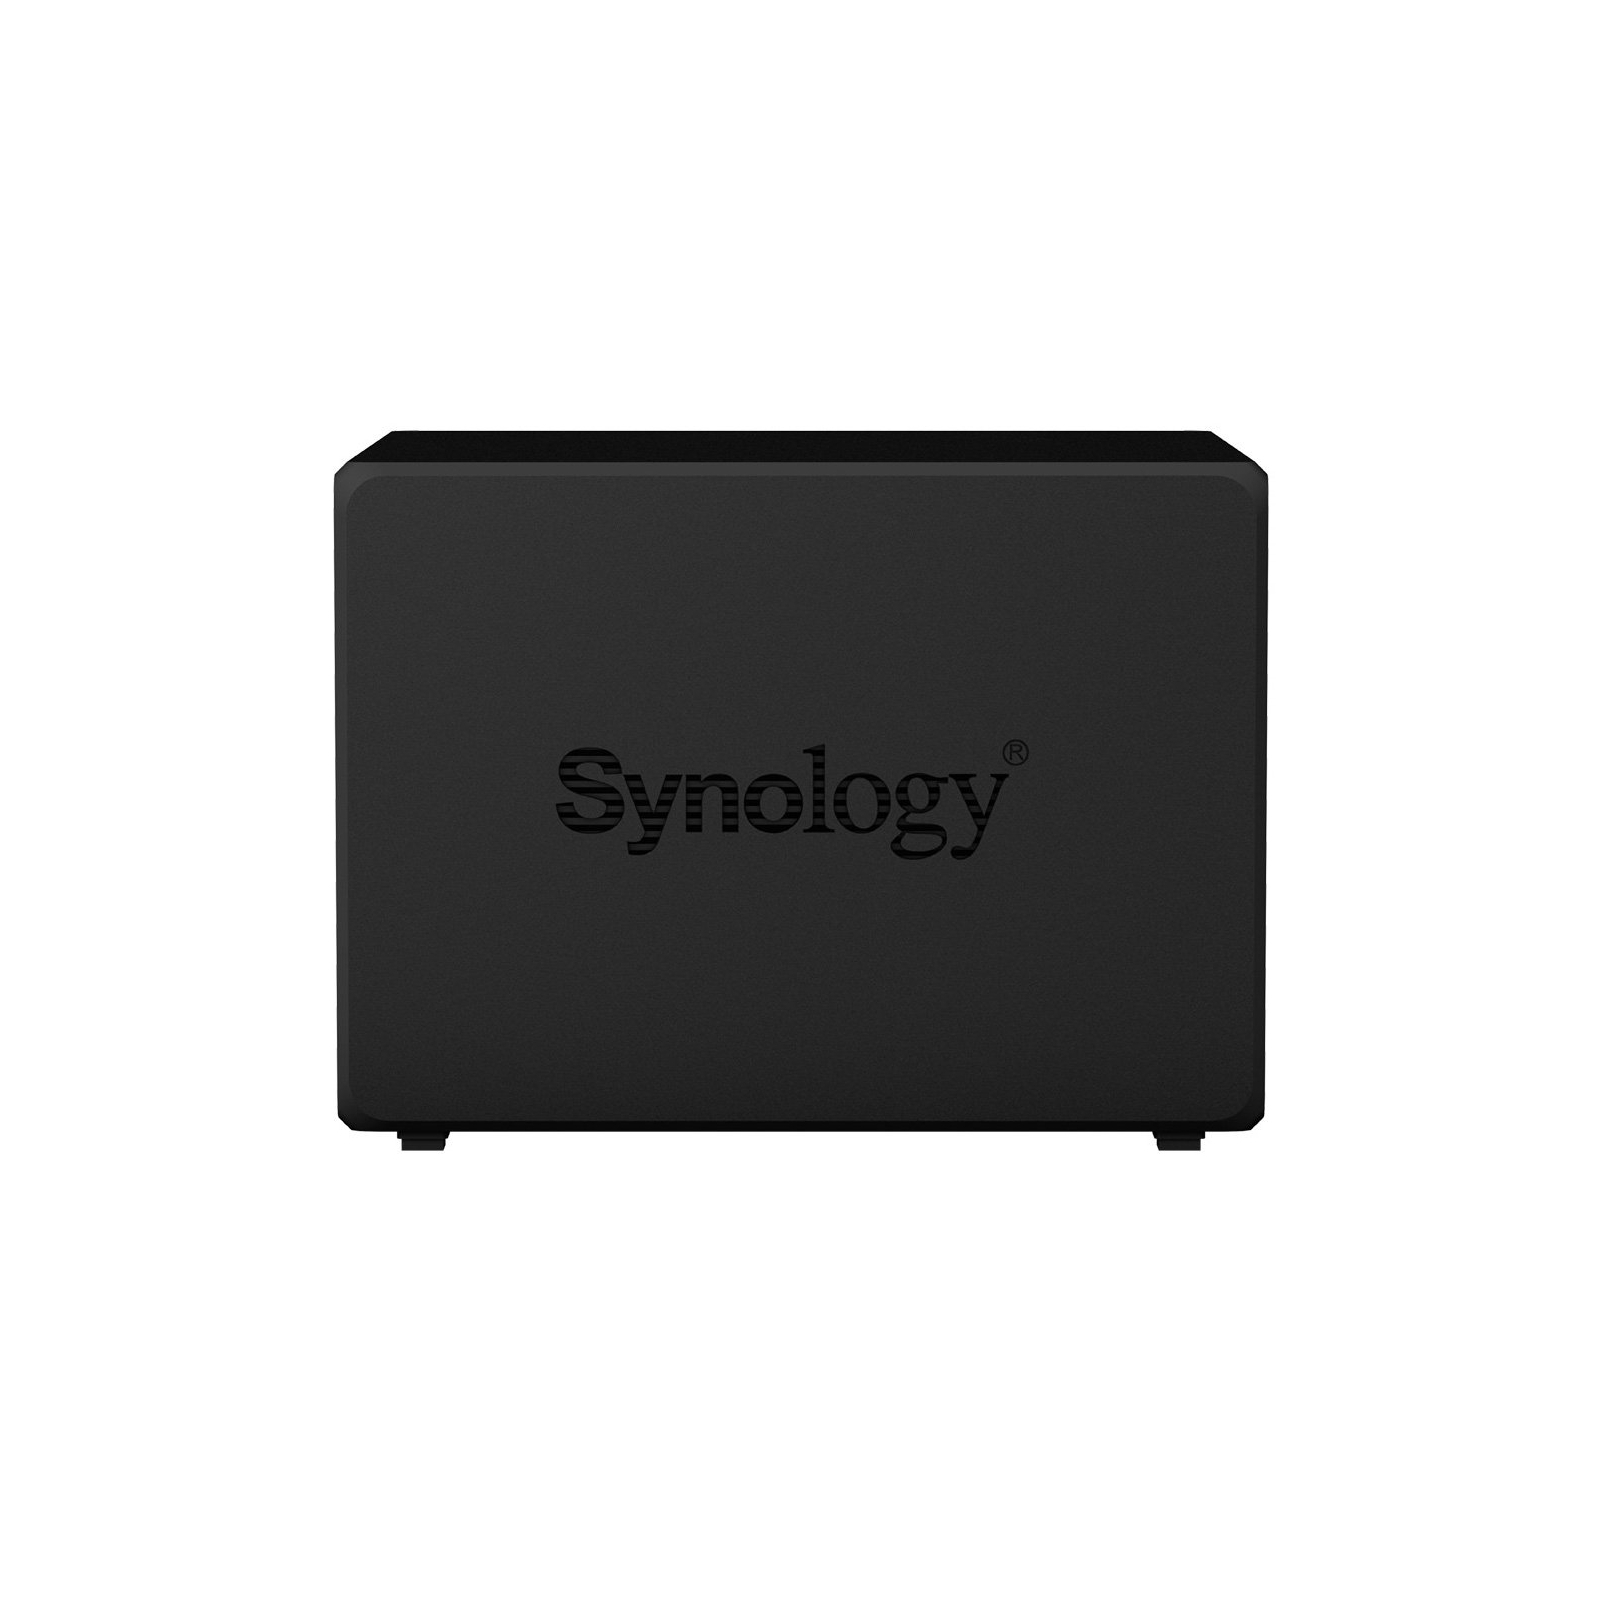 NAS Synology DS418play изображение 4